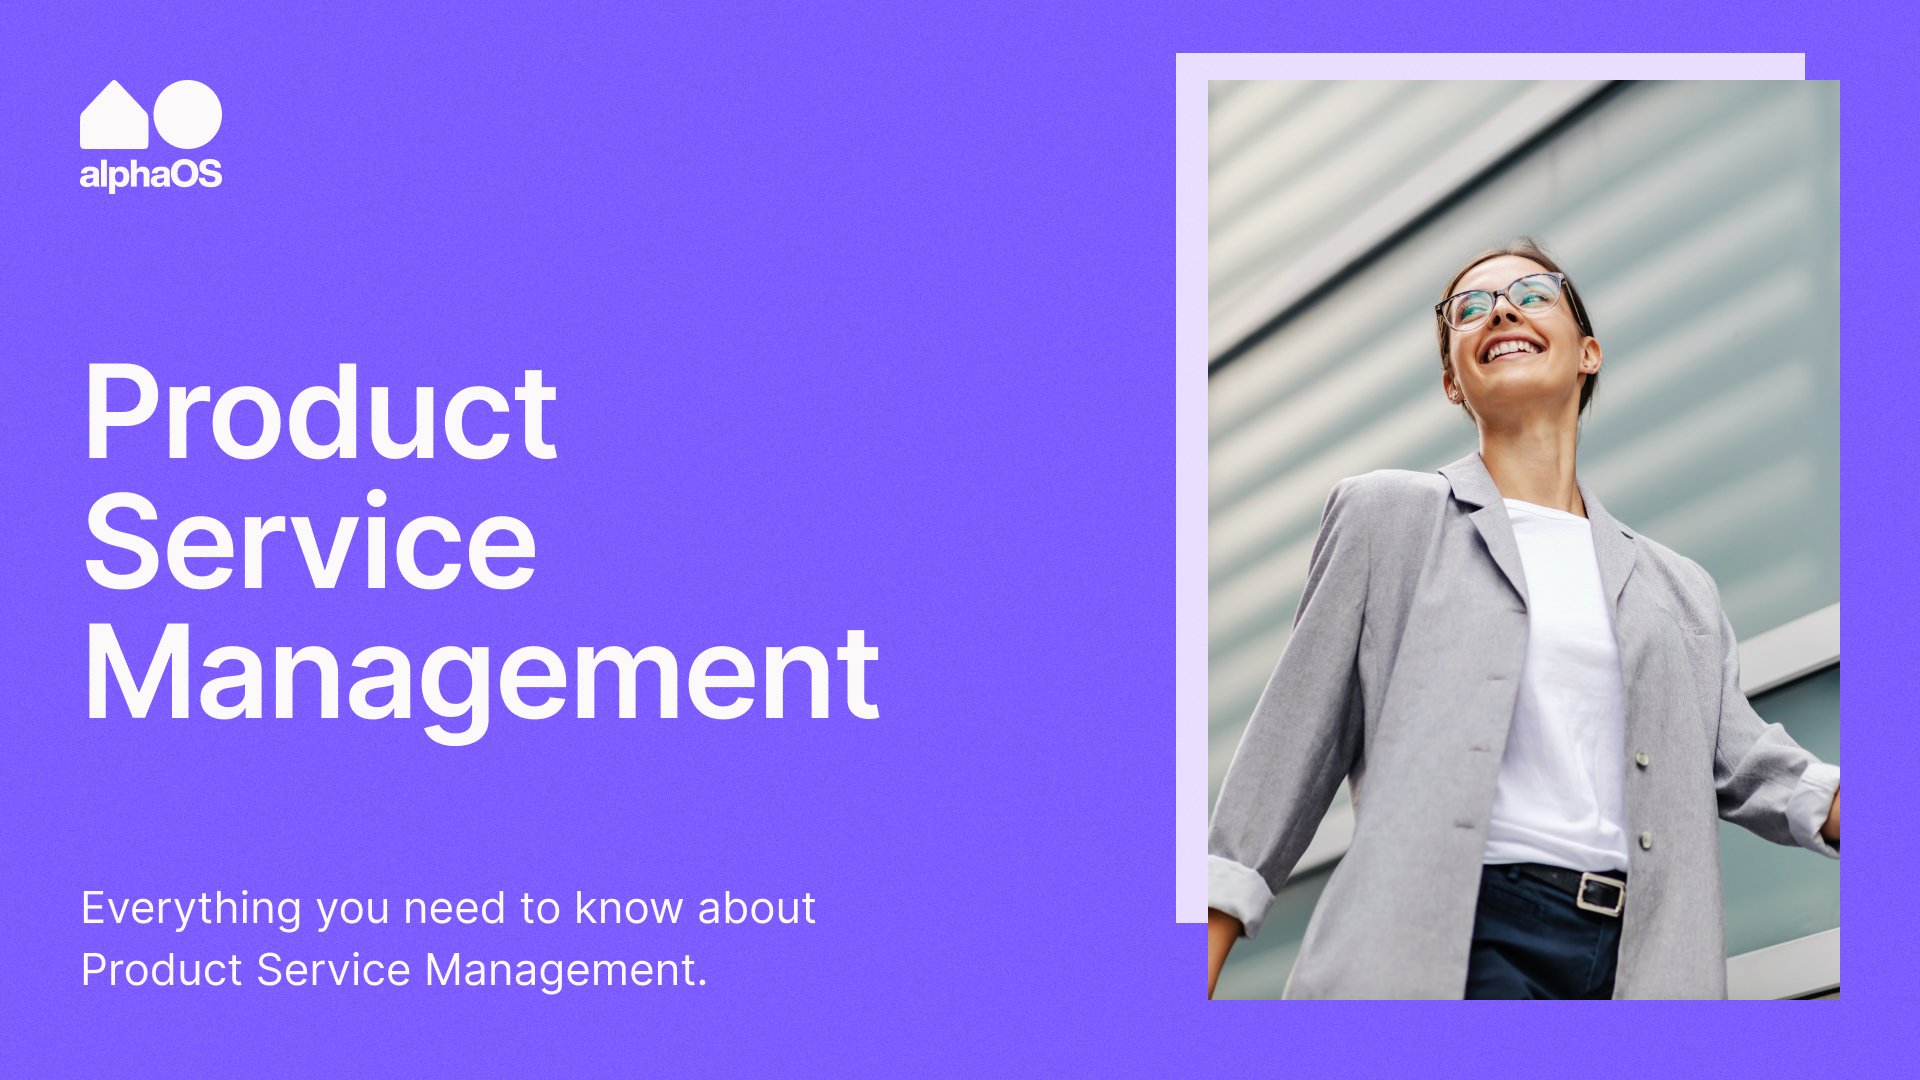 What is Product Service Management?